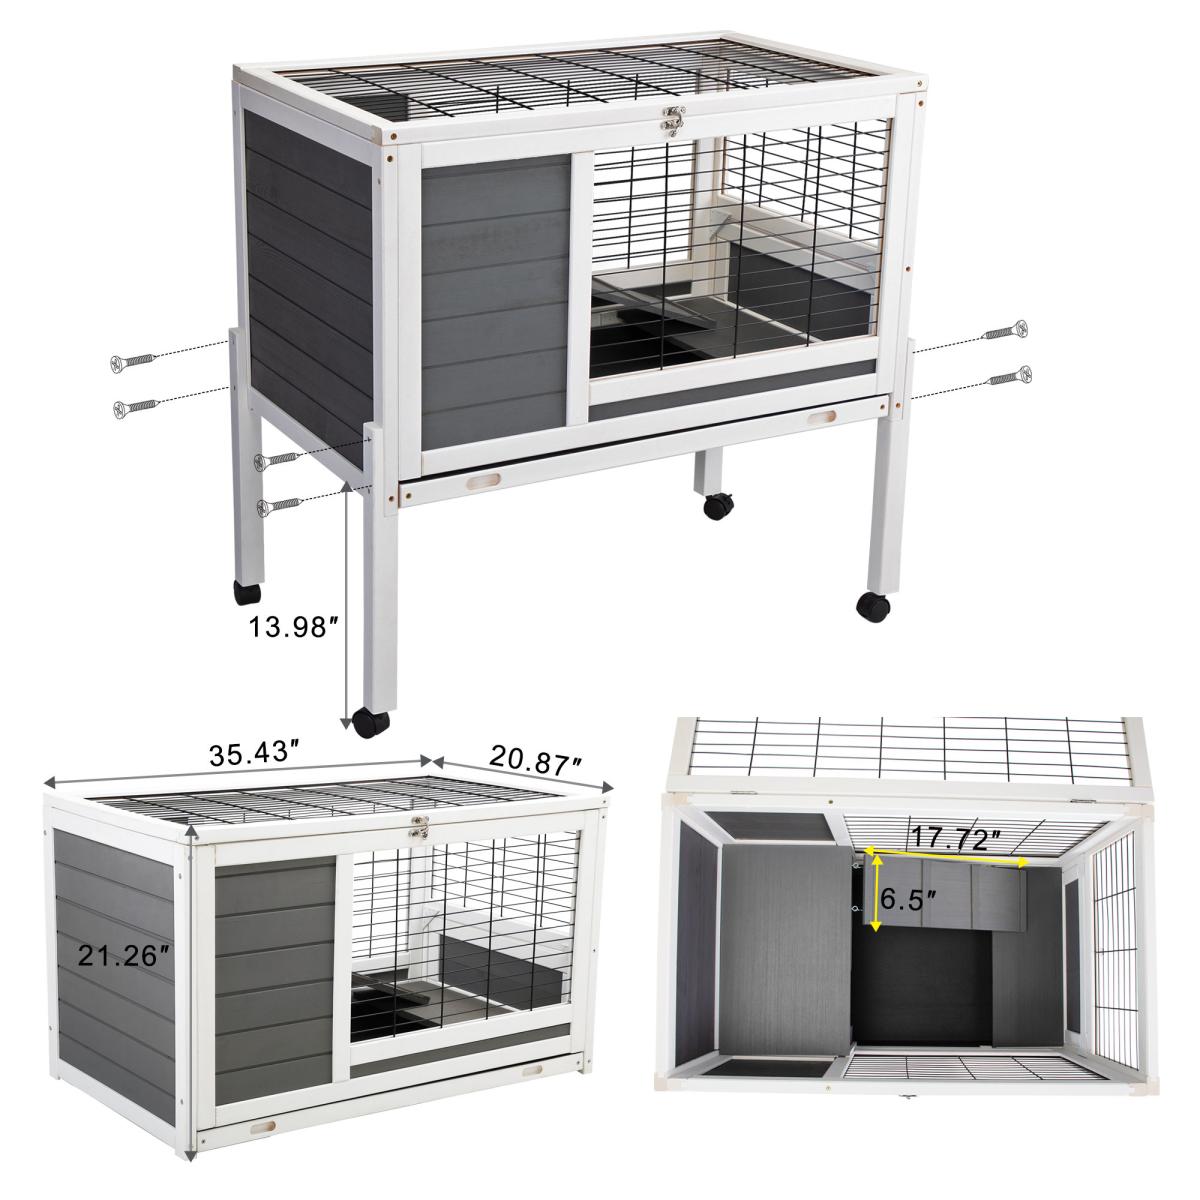 Wooden Rabbit Hutch with Wheels, Indoor/Outdoor Pet House with Pull Out Tray - Gray and White